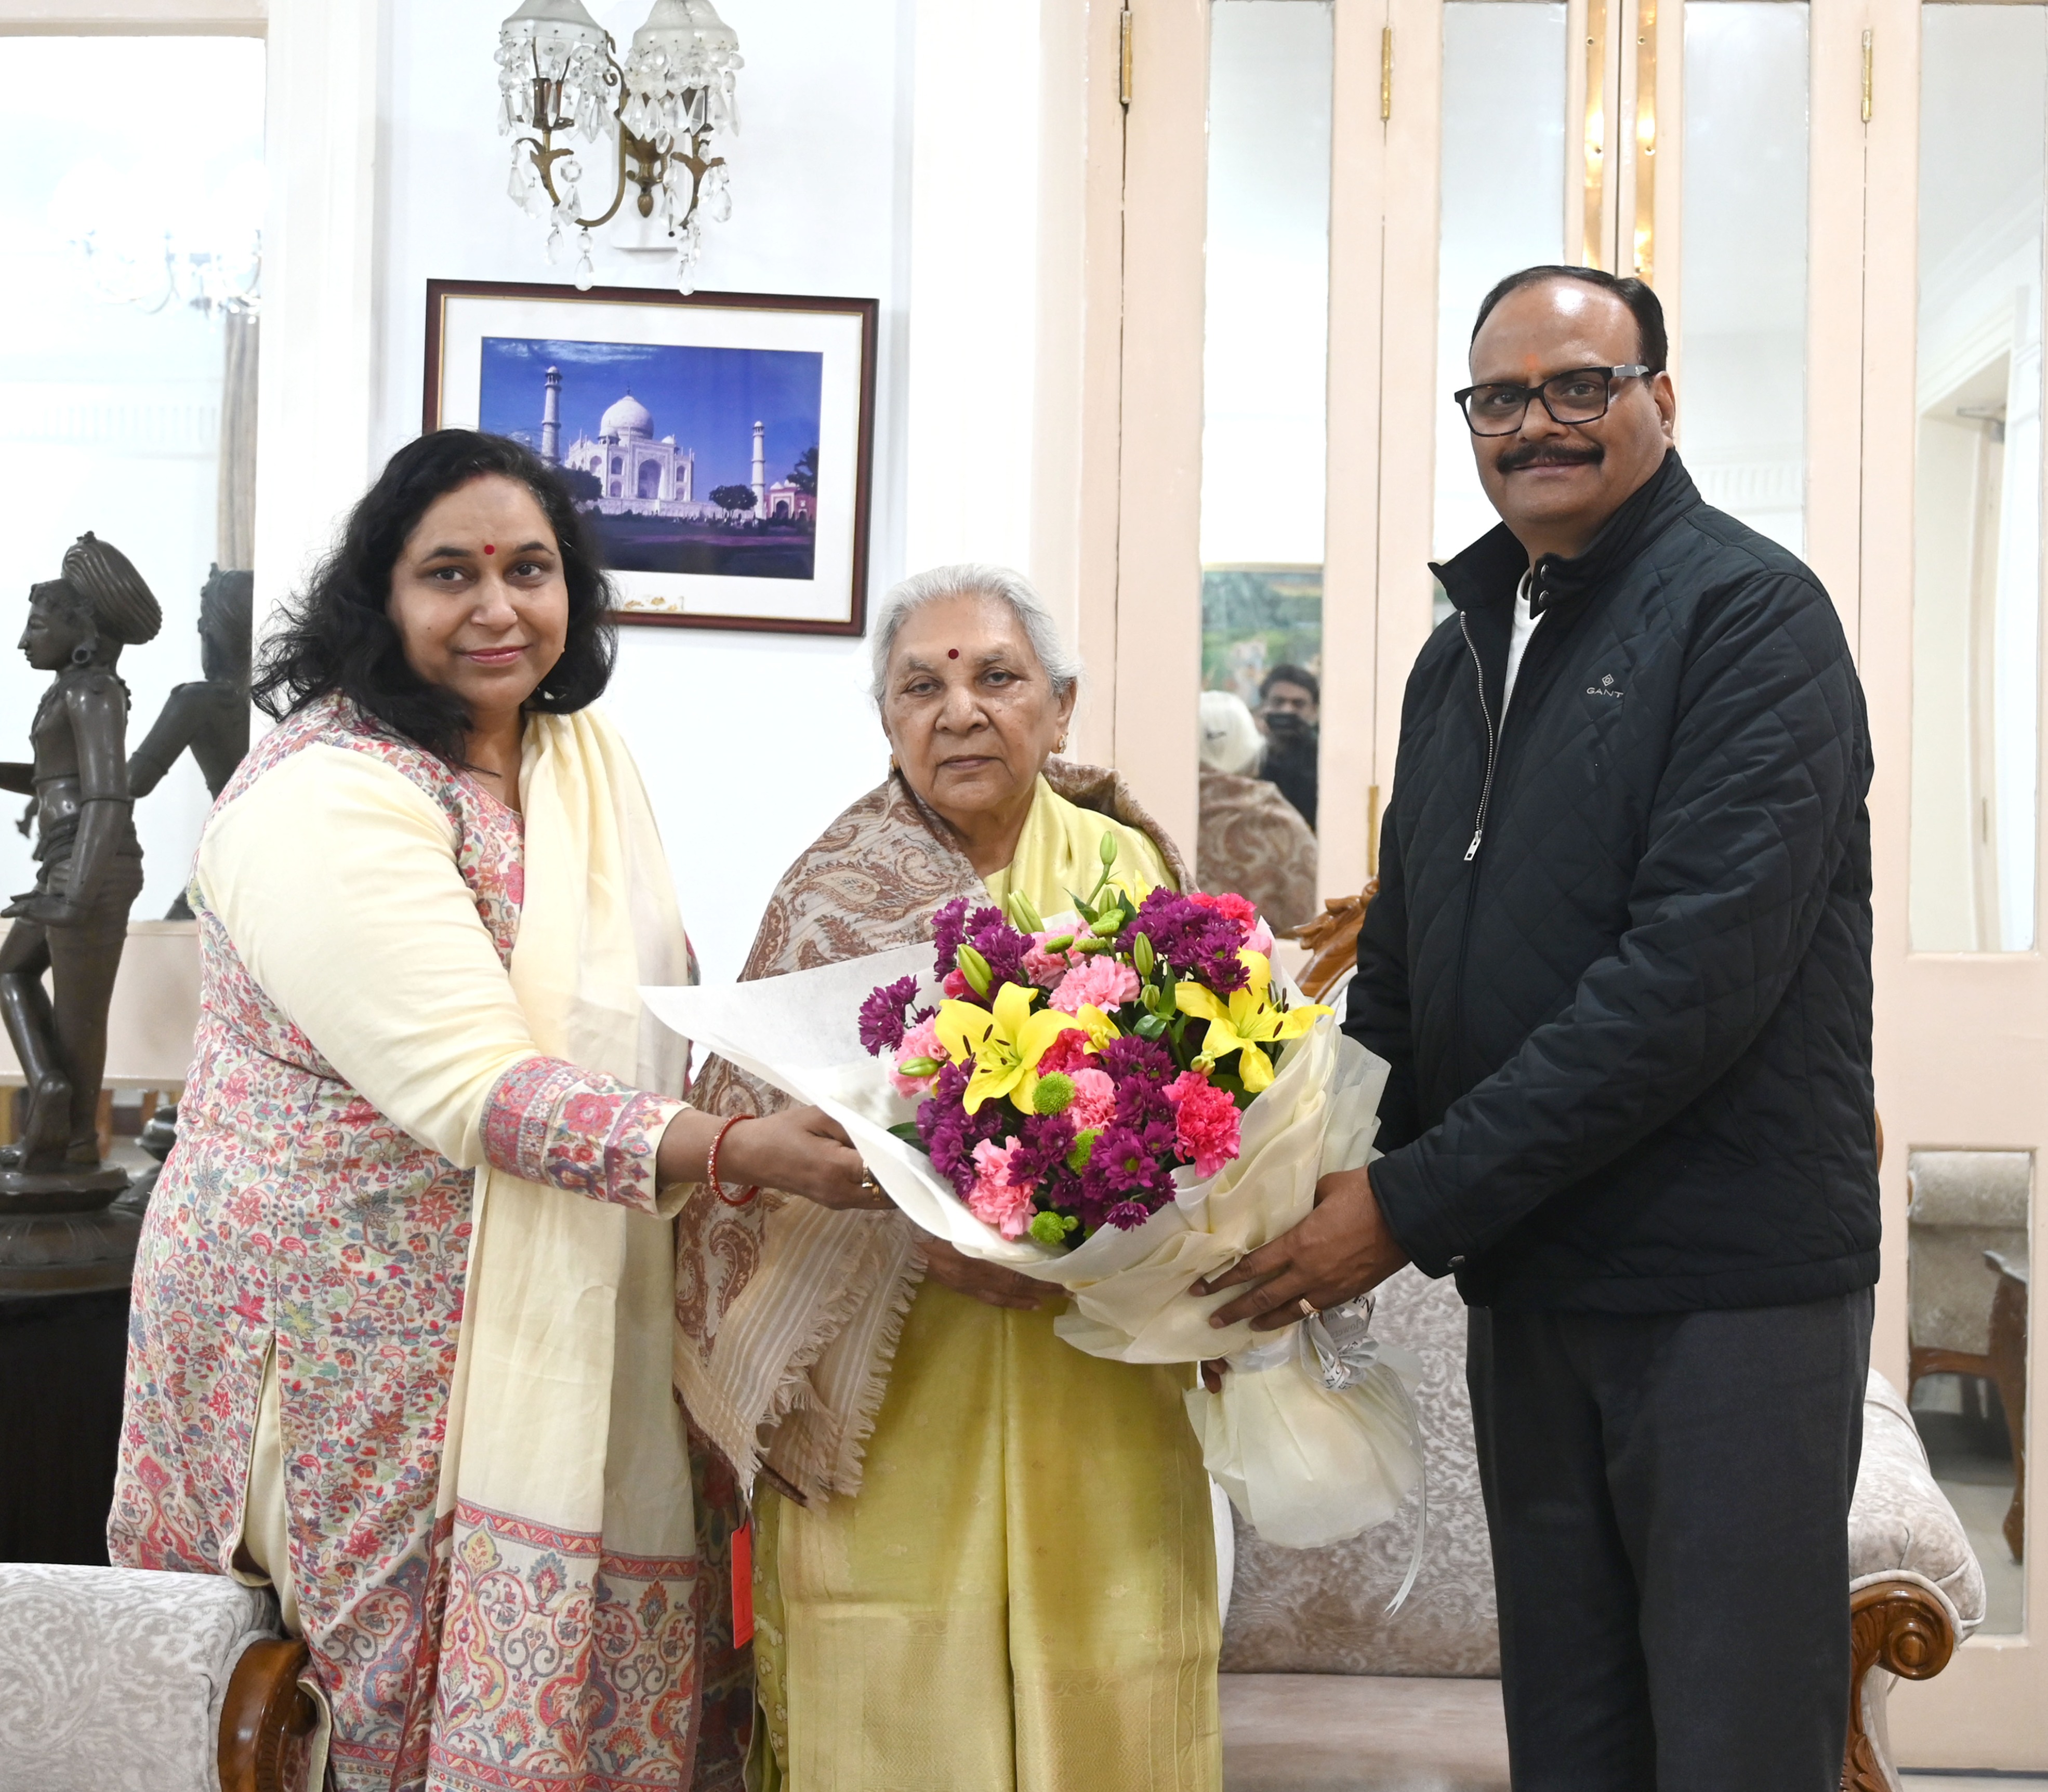 Dignitaries Officers & Employees met the Governor and extended new year greetings